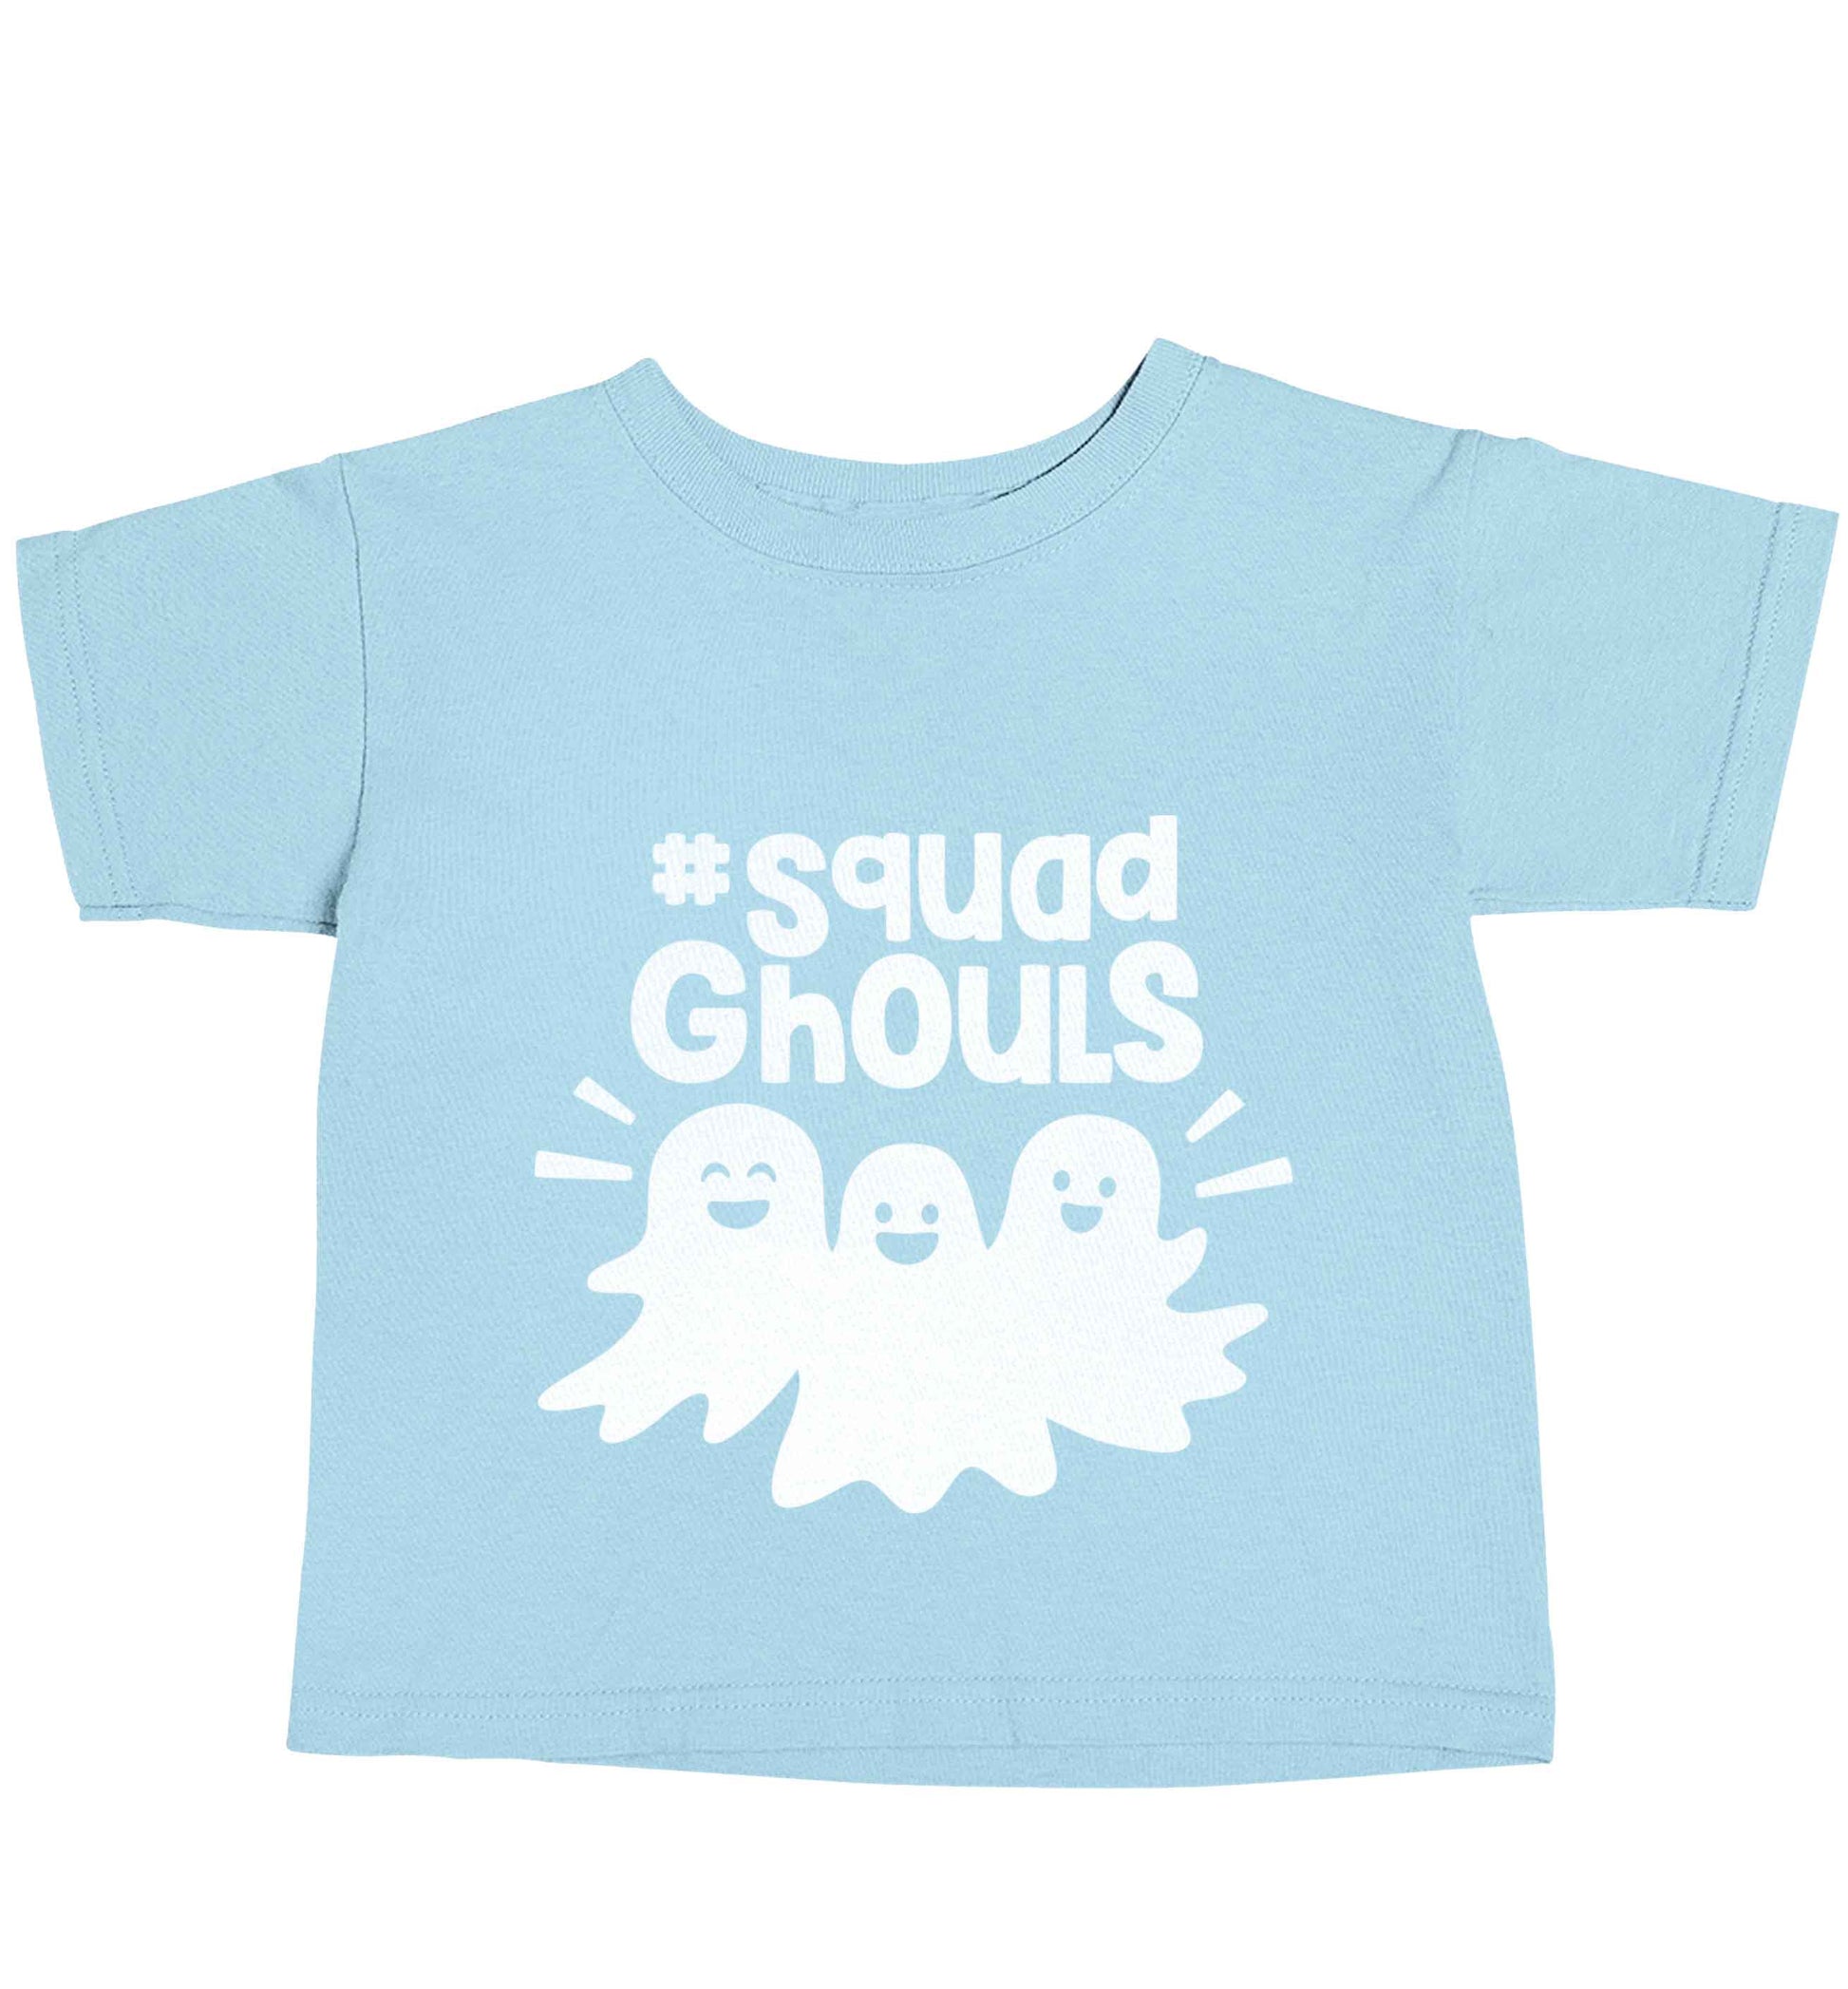 Squad ghouls Kit light blue baby toddler Tshirt 2 Years